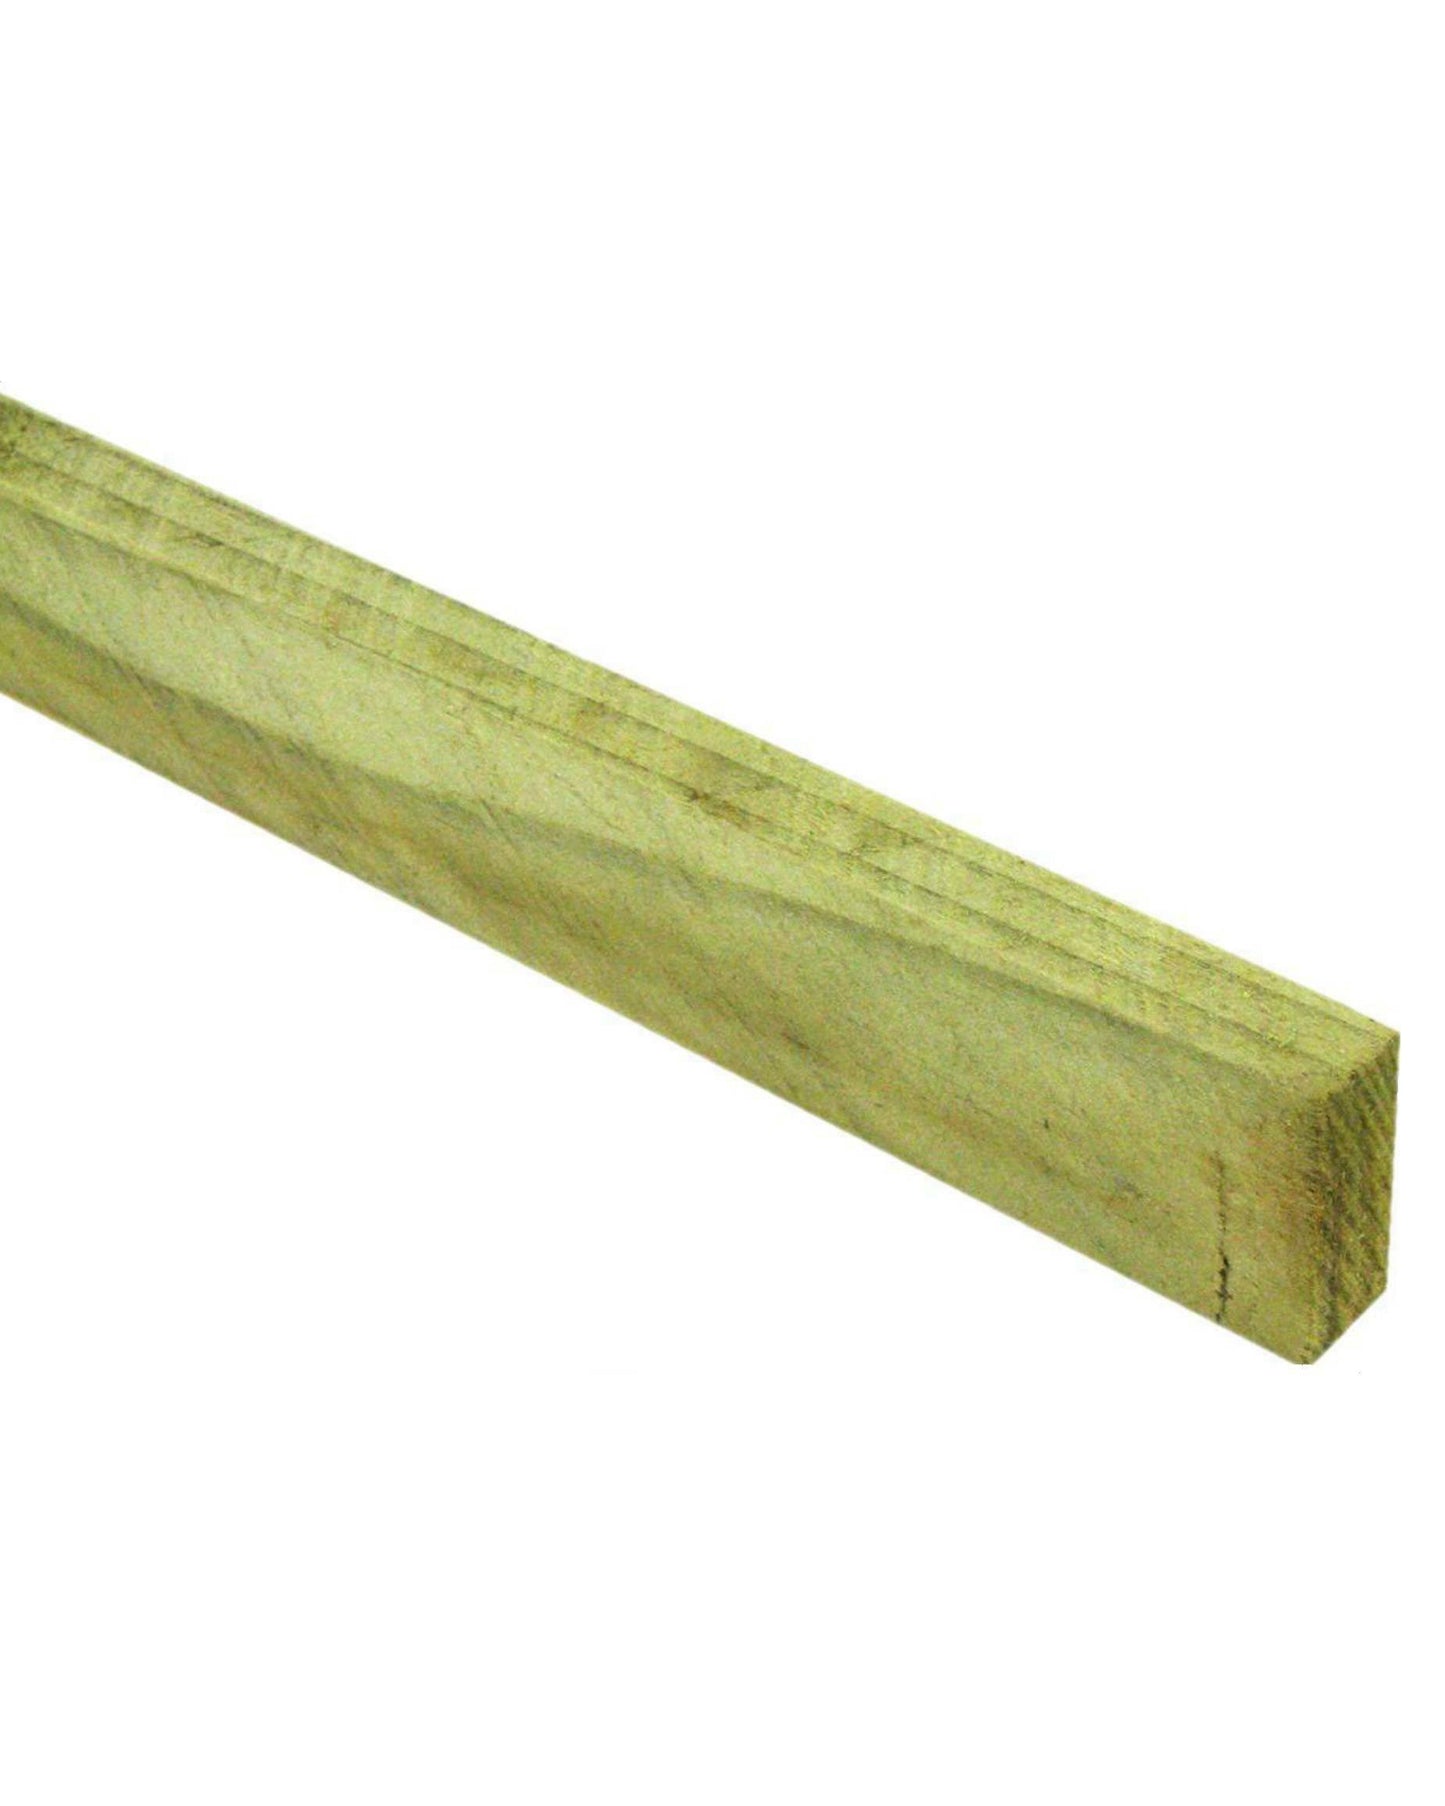 Treated Timber Batten 25mm x 50mm - 2.4m (Pack of 10 - 24m)